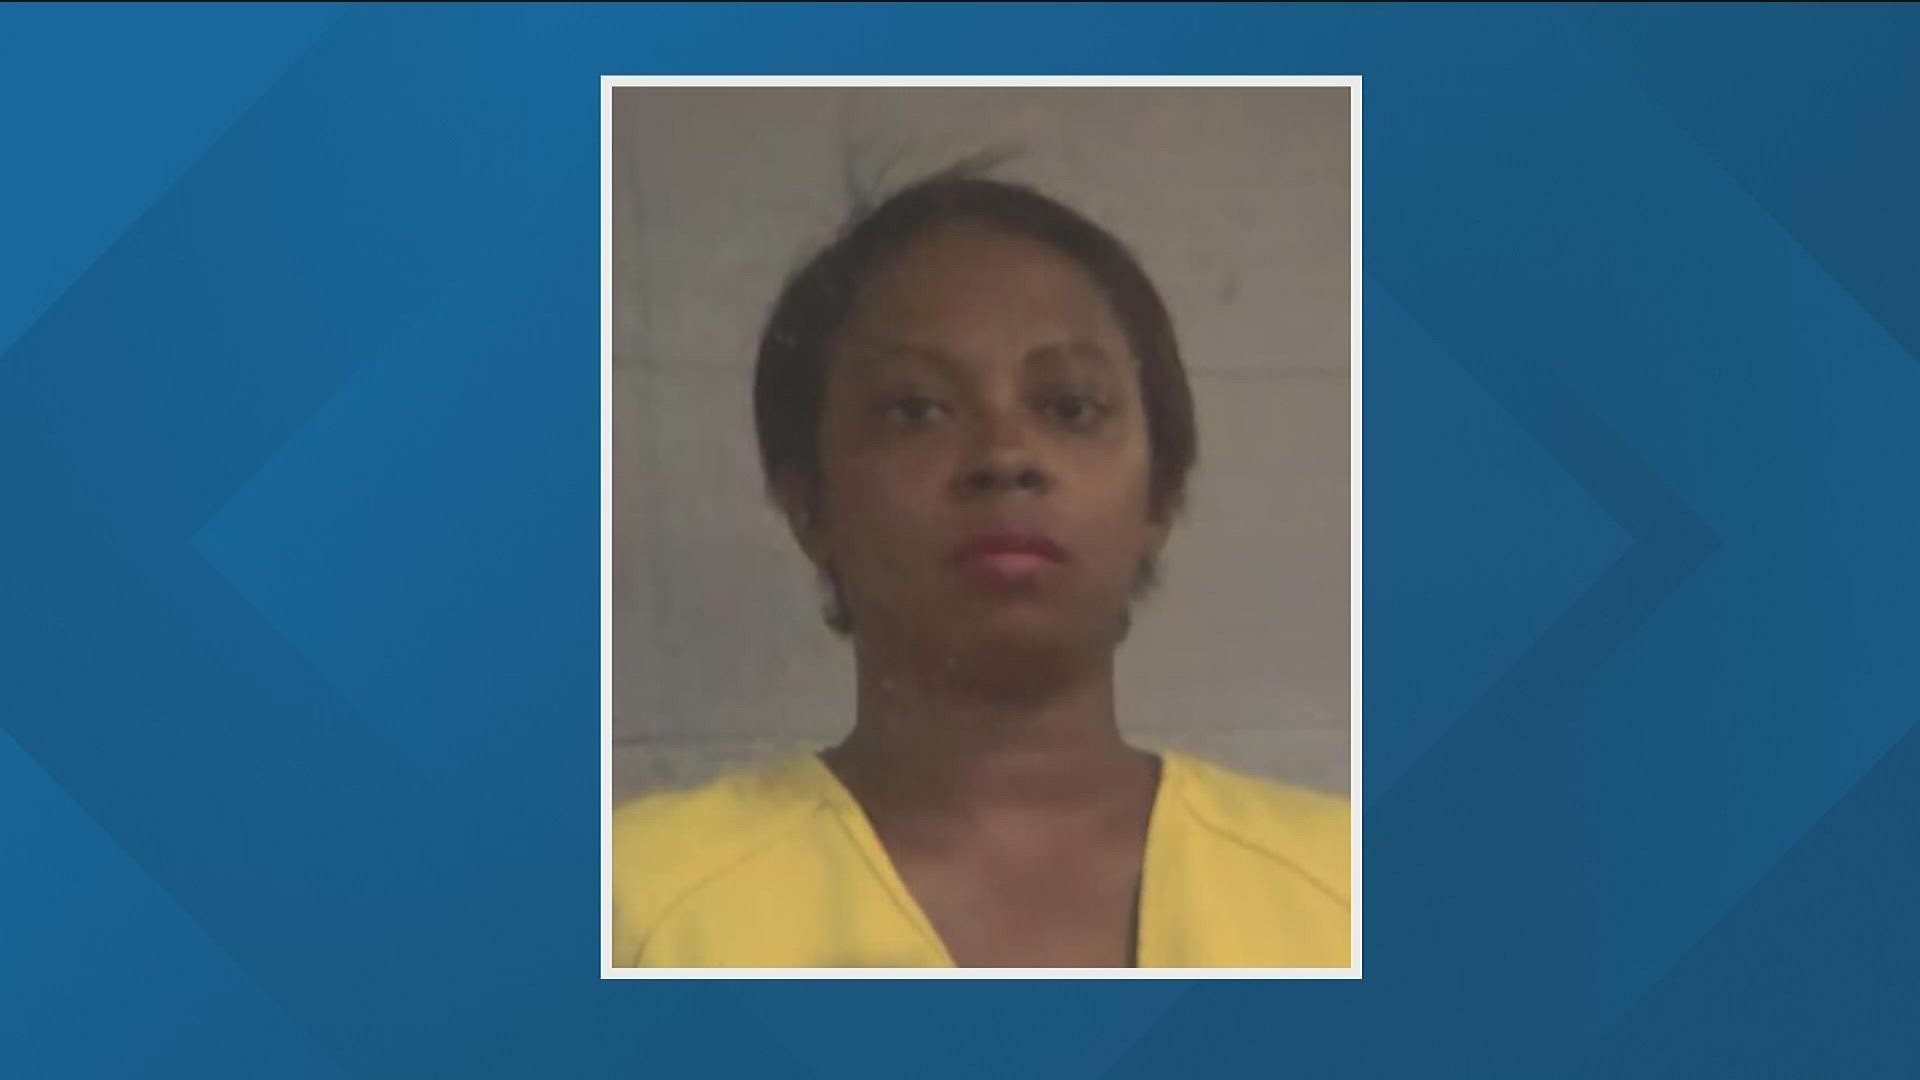 Cairo Jordan's mother, Dejaune Anderson is facing charges in the child's death.